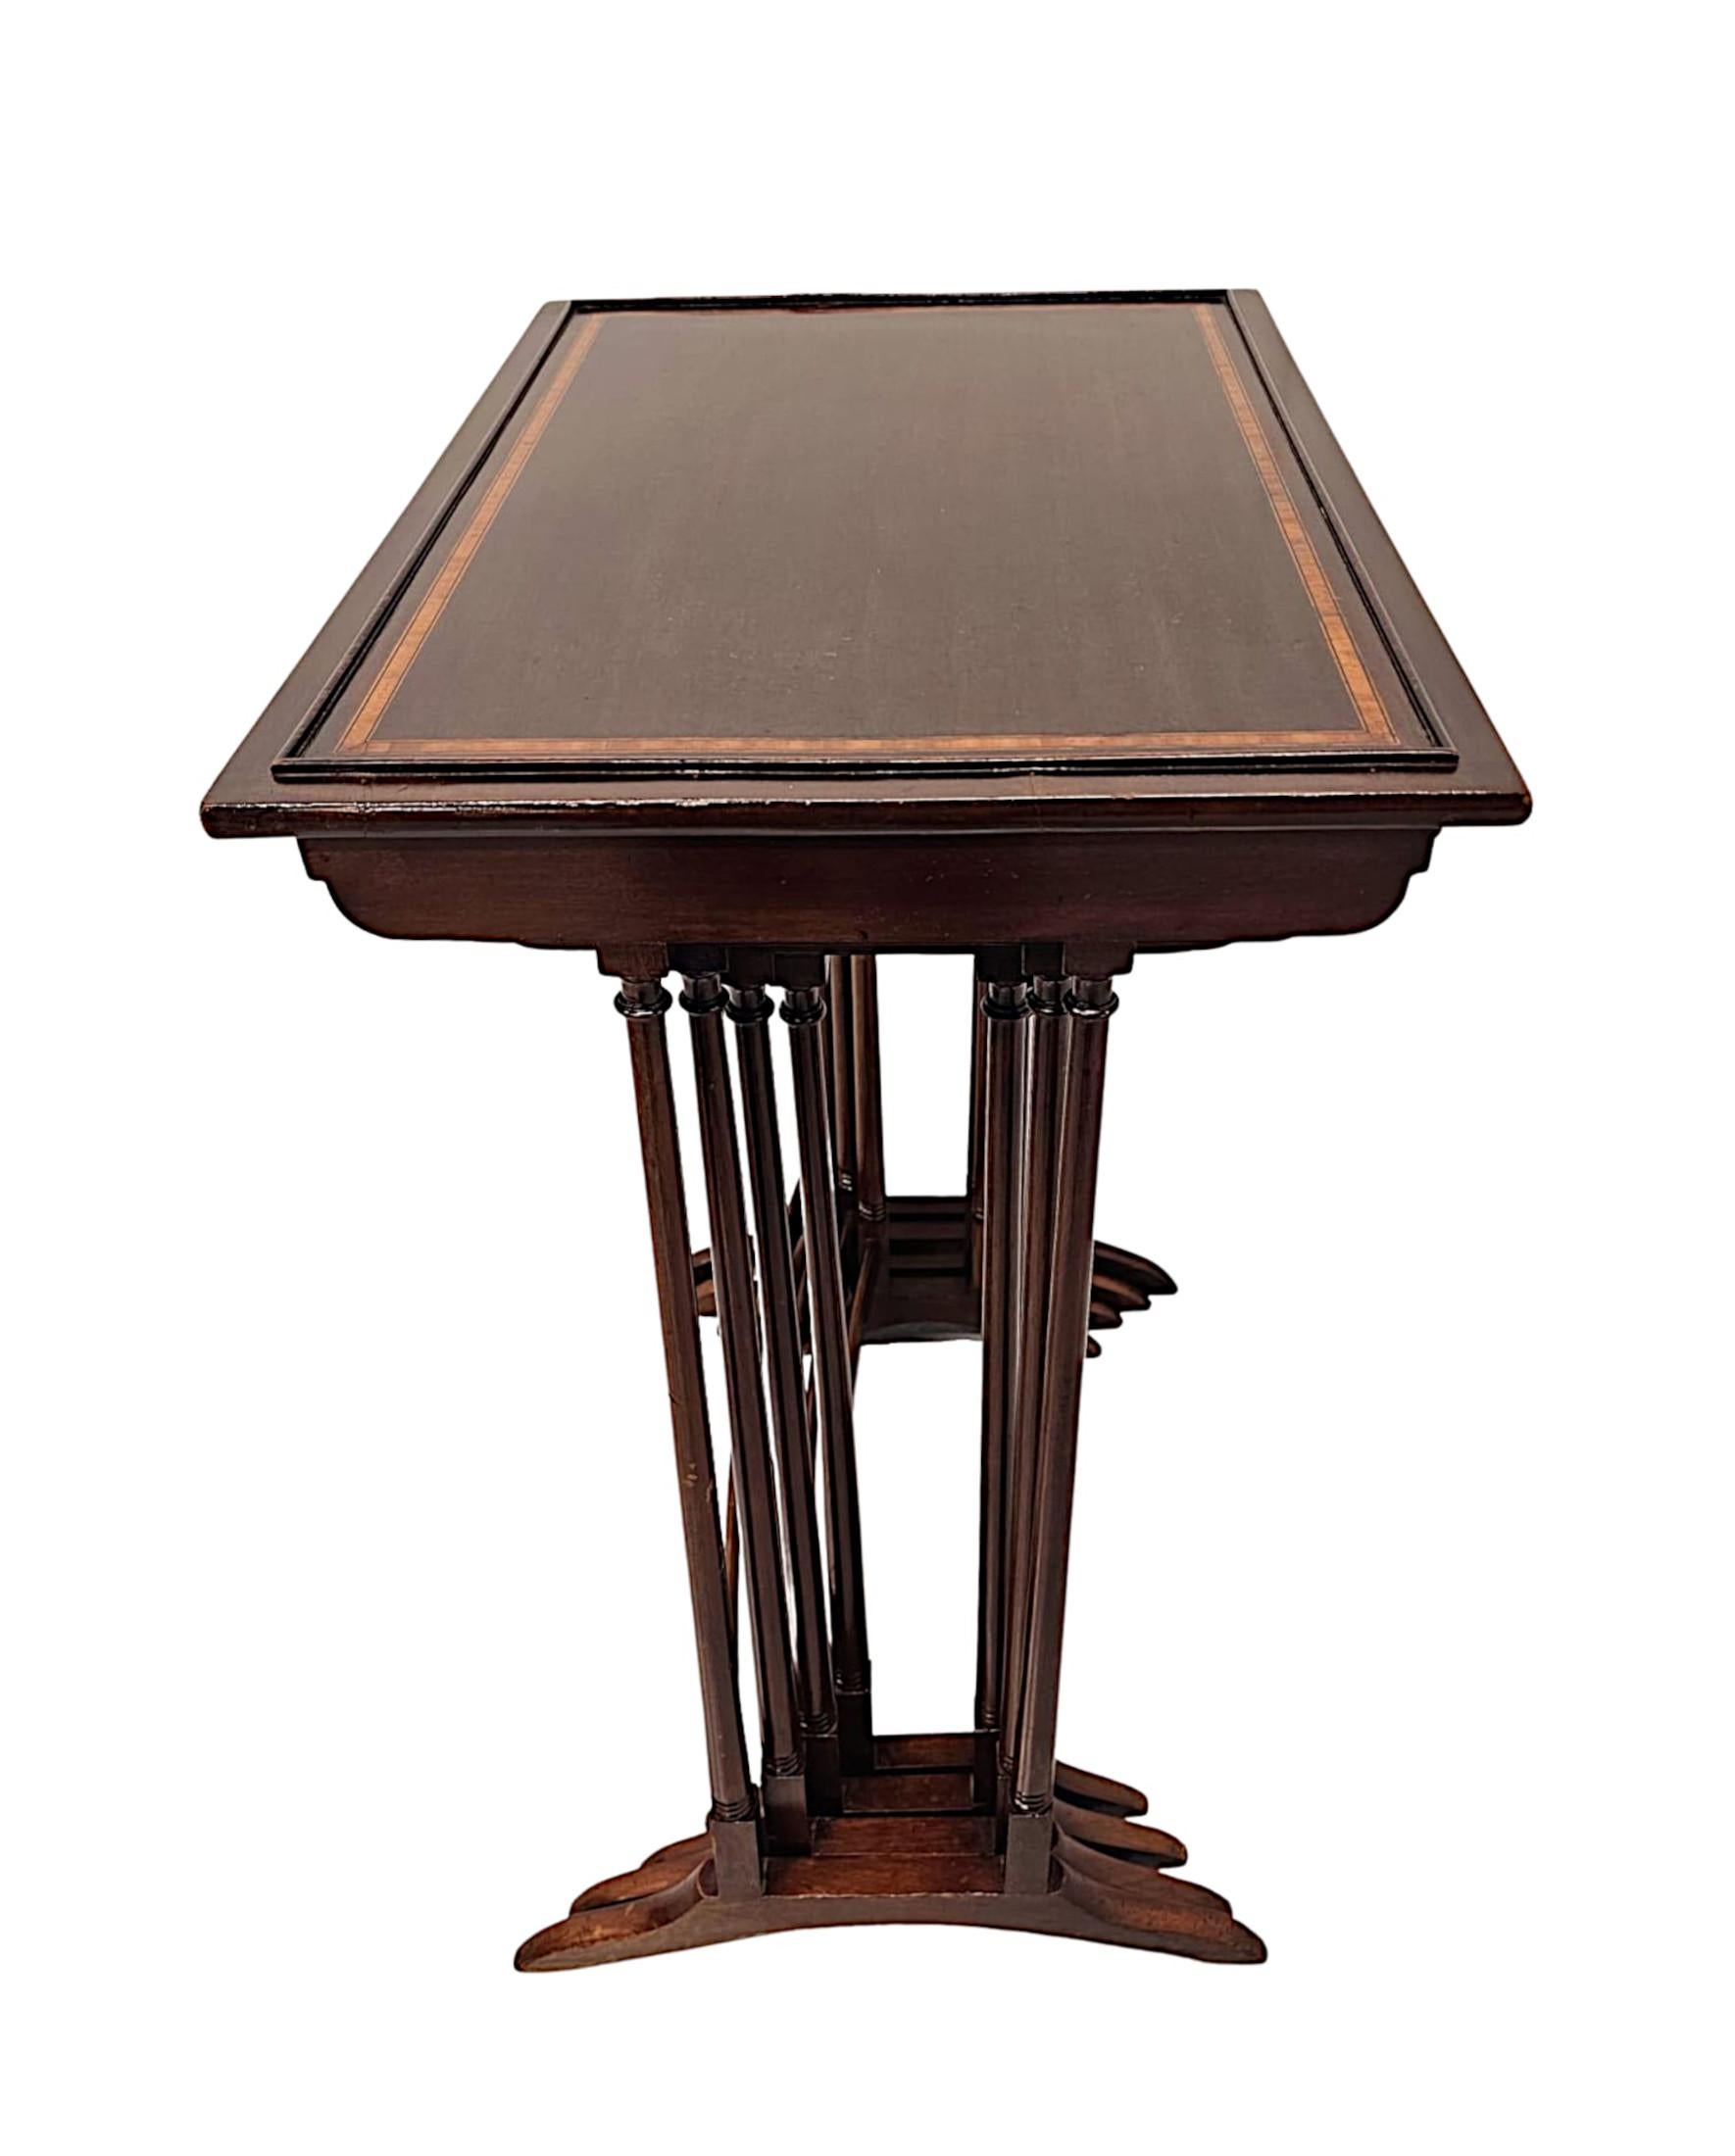 A fabulous Edwardian nest of four richly patinated mahogany tables, of exceptional quality, finely carved and beautifully inlaid throughout.  The well figured, moulded, galleried and inlaid top of rectangular form is supported on a pair of elegant